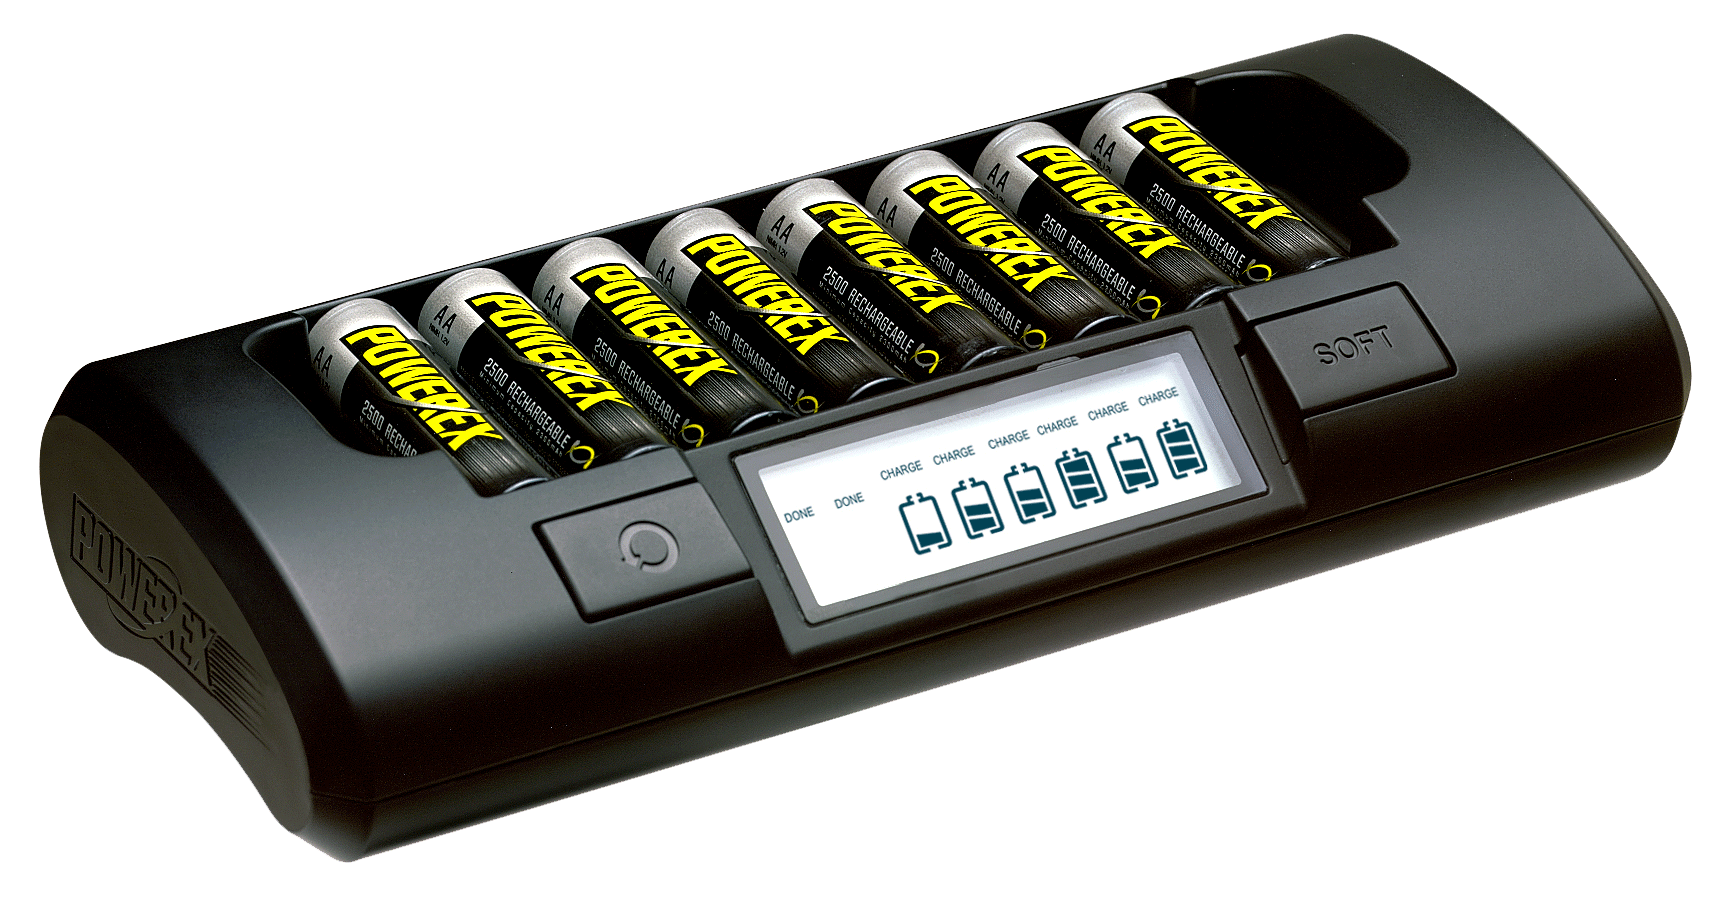 Powerex Mh C801d 8 Cell Aa Aaa Battery Charger Film Supplies Online